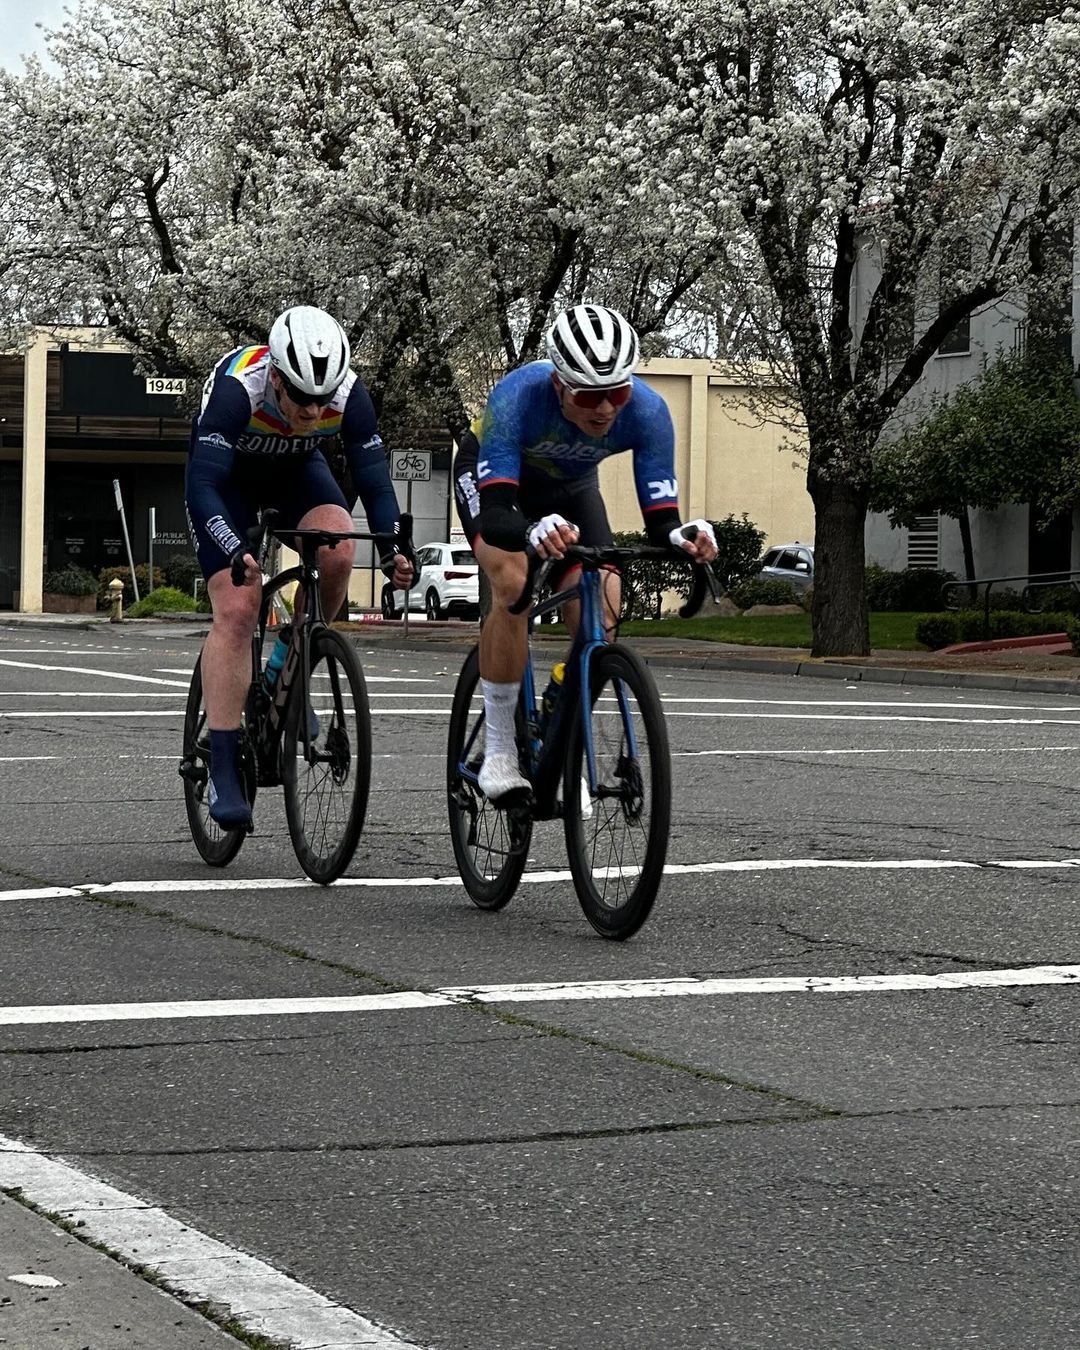 After a bit of frustration from a cancelled Snelling road race (thank you @velopromo and @bike_curious for thinking safety first!), the boys lined up for the #mercedcriterium.  While it didn’t go our way for the group of hitters we have lining up for our Cat 4 squad, we know there are good things to come! In the 35+123 race, our DVC diesel engine @jyangsta showed that he’s brought the huge gains in fitness across to the 2024 season, nailing 🥇in a field with some of the strongest masters racers in the #ncnca ! Congrats James, and to the rest of the squad for flying the colors! On to the next race!

@sportful @sfitalianathleticclub @equatorcoffees @poggio_labs @achieveptc @tripsforkidsmarin @sage.realestategroup @marinservicecourse @jkbrkb  #onewealthadvisors